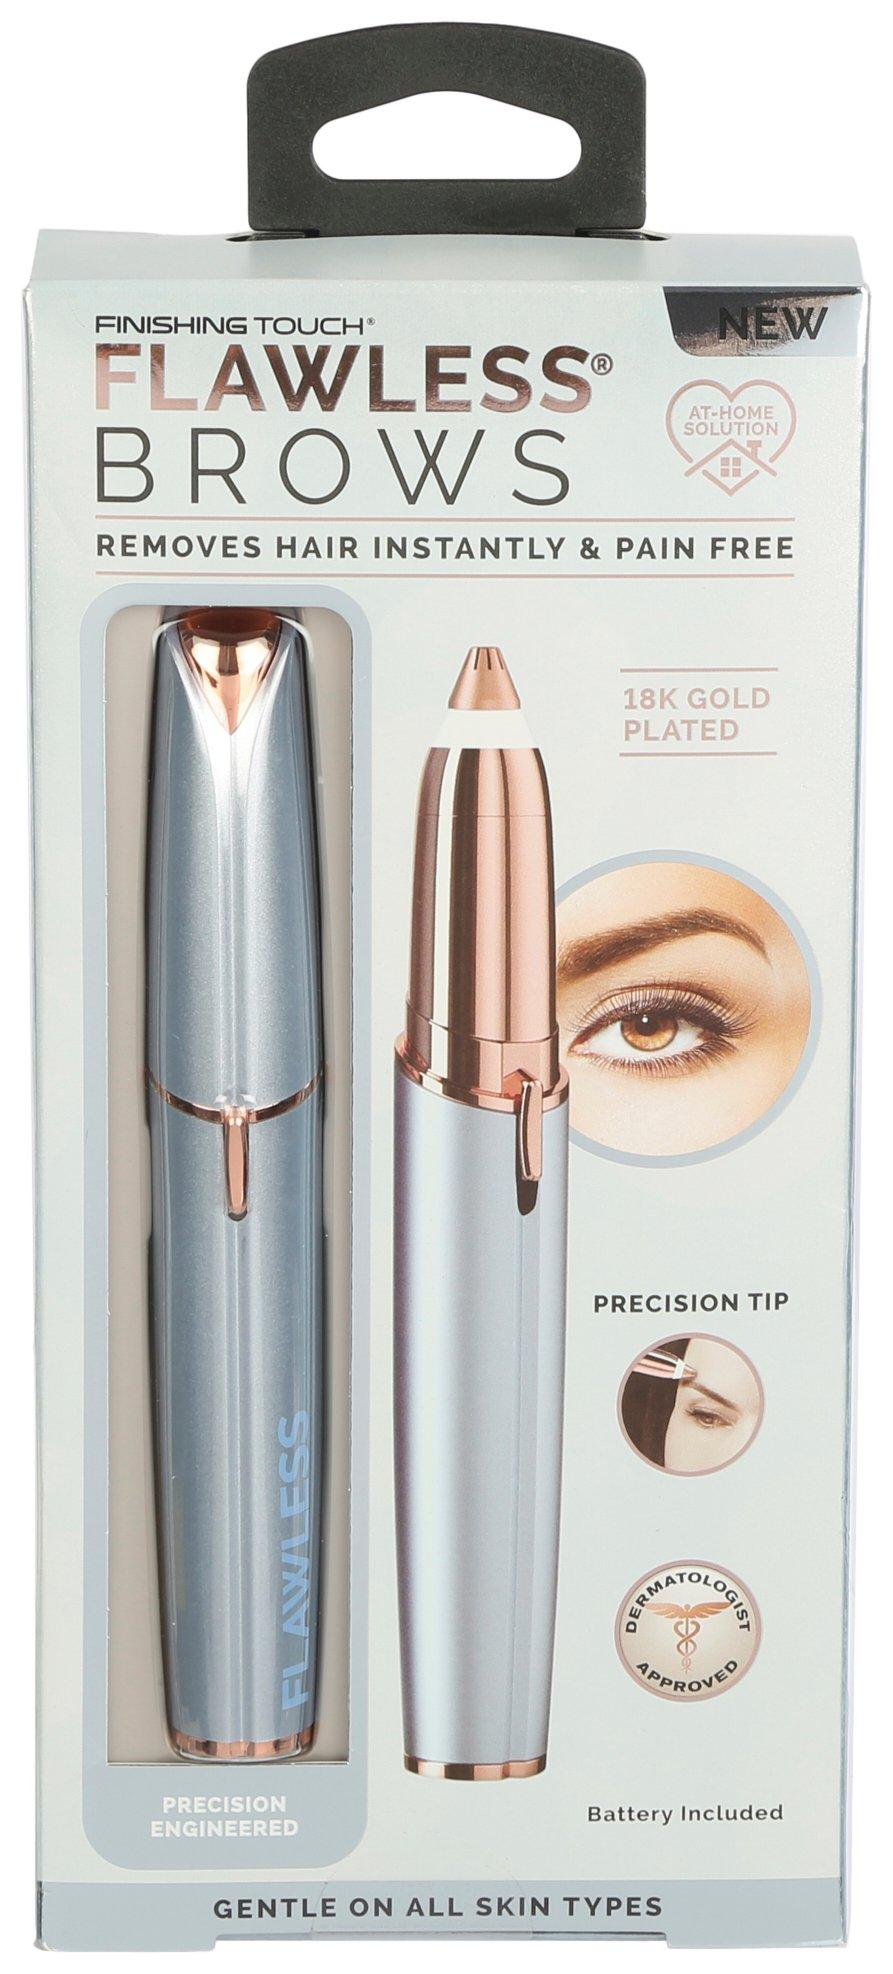 Flawless BrowS Hair Remover With Built-In Light